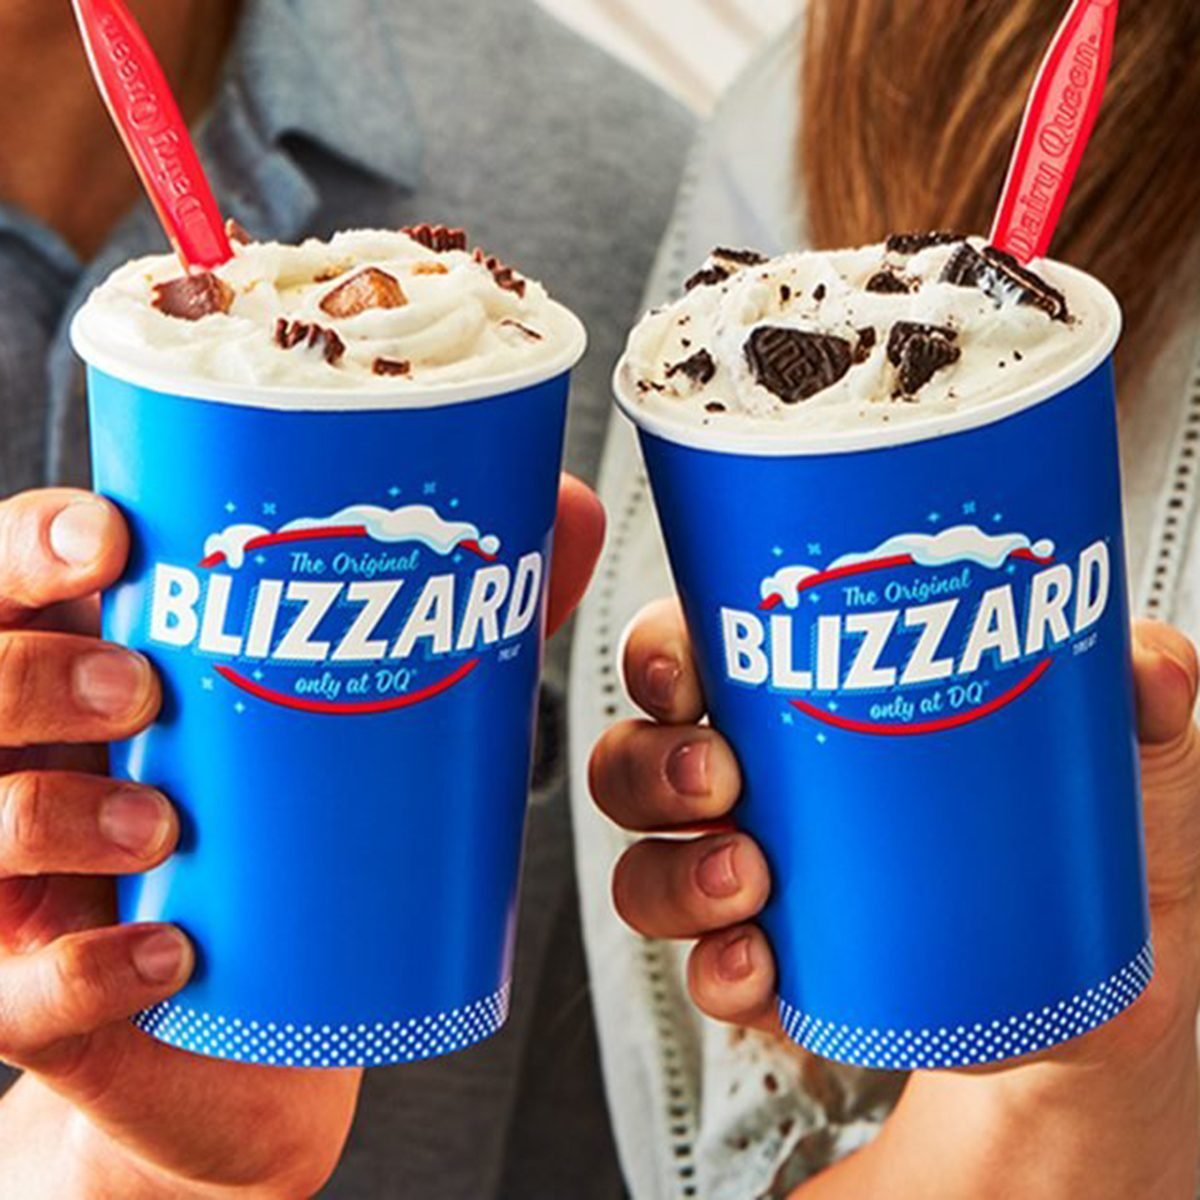 8 Things You Probably Never Knew About the Dairy Queen Blizzard